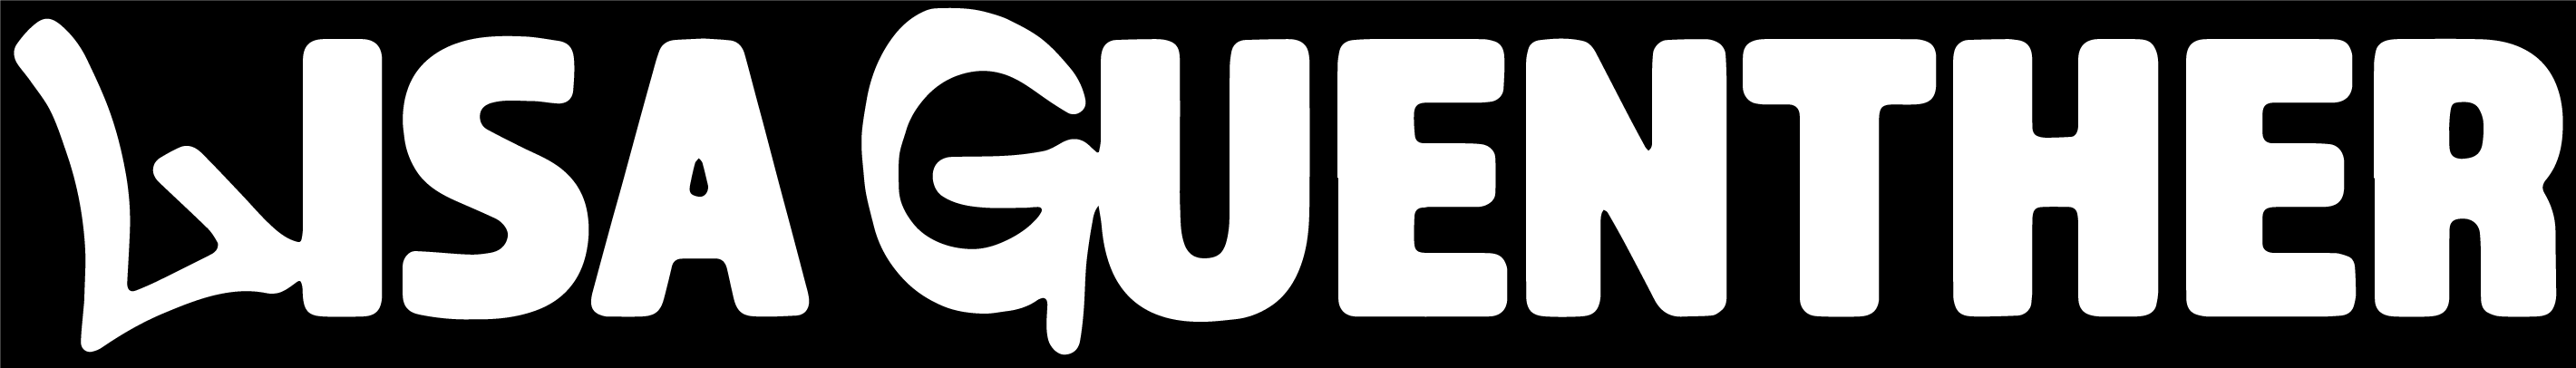 White logo spells out "Lisa Guenther" with the 'L' and the 'G' in a graffiti font and the rest of the name in a san-serif, clean font.